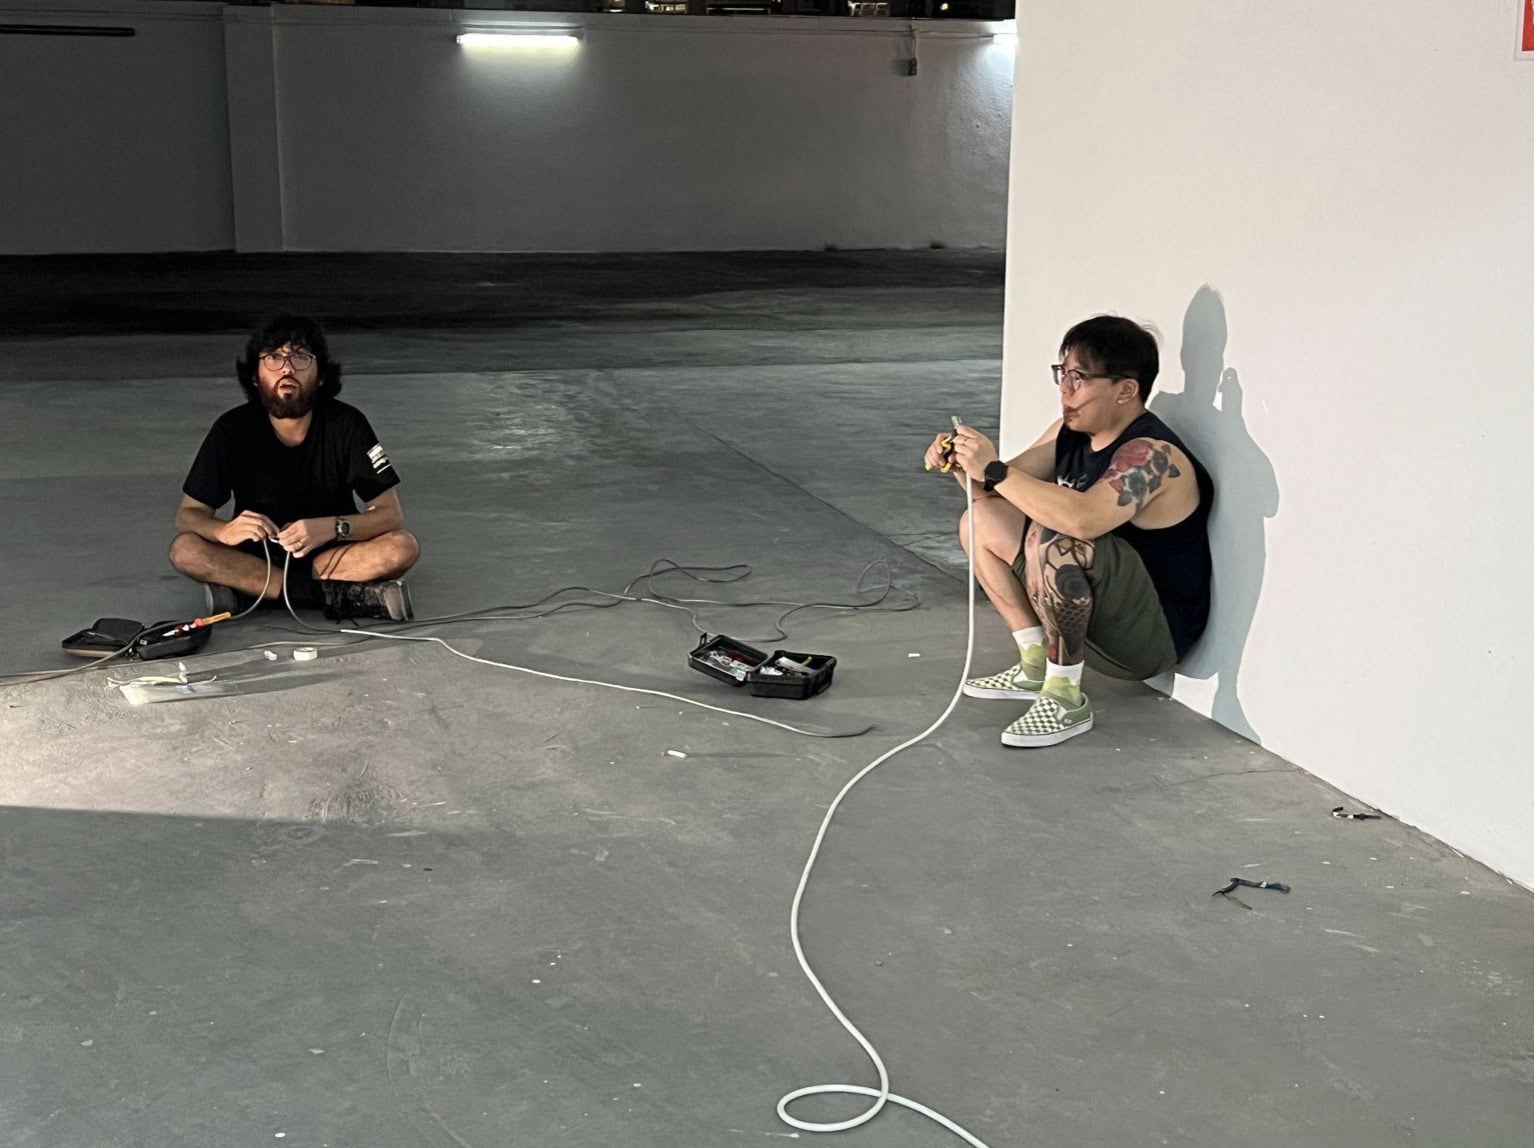 Festival Director John Tung and a friend of Substation wiring new lights in the event space – not something you’d typically see in an art exhibition.